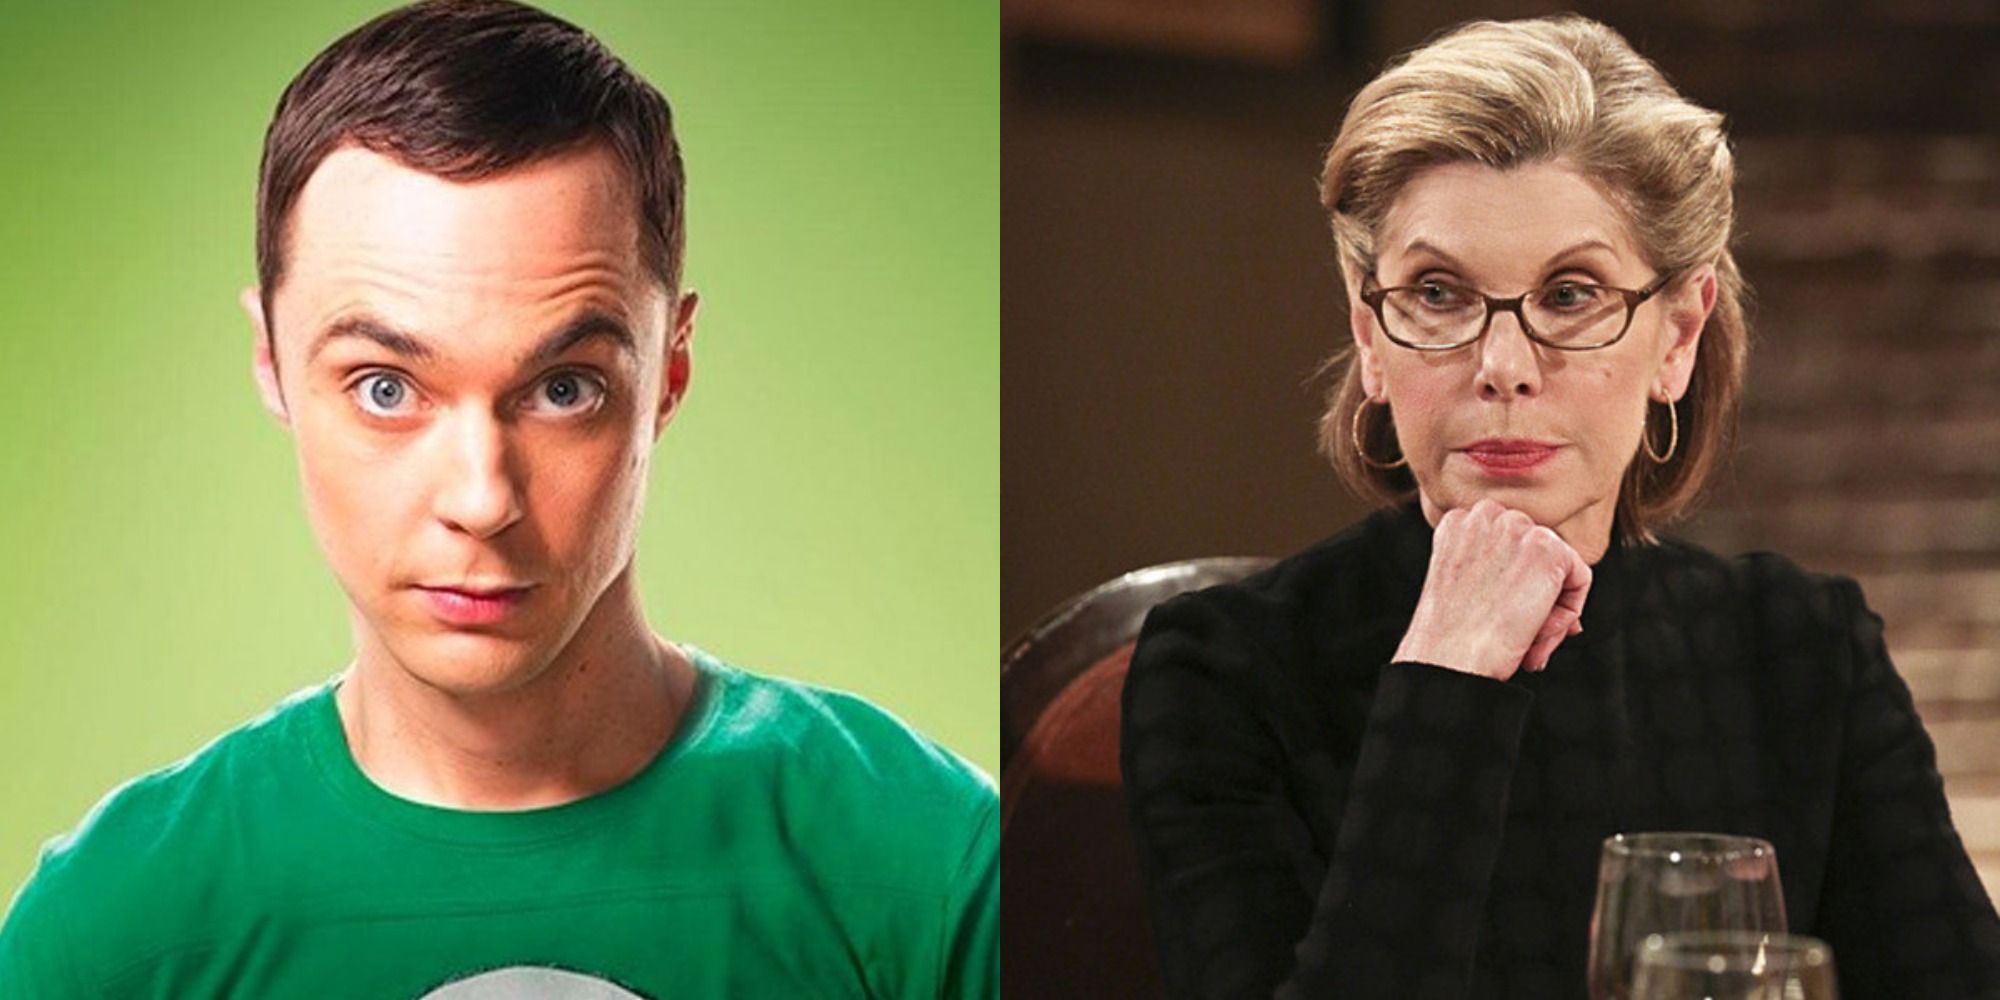 Sheldon and Dr. Beverly Hofstadter from The Big Bang Theory